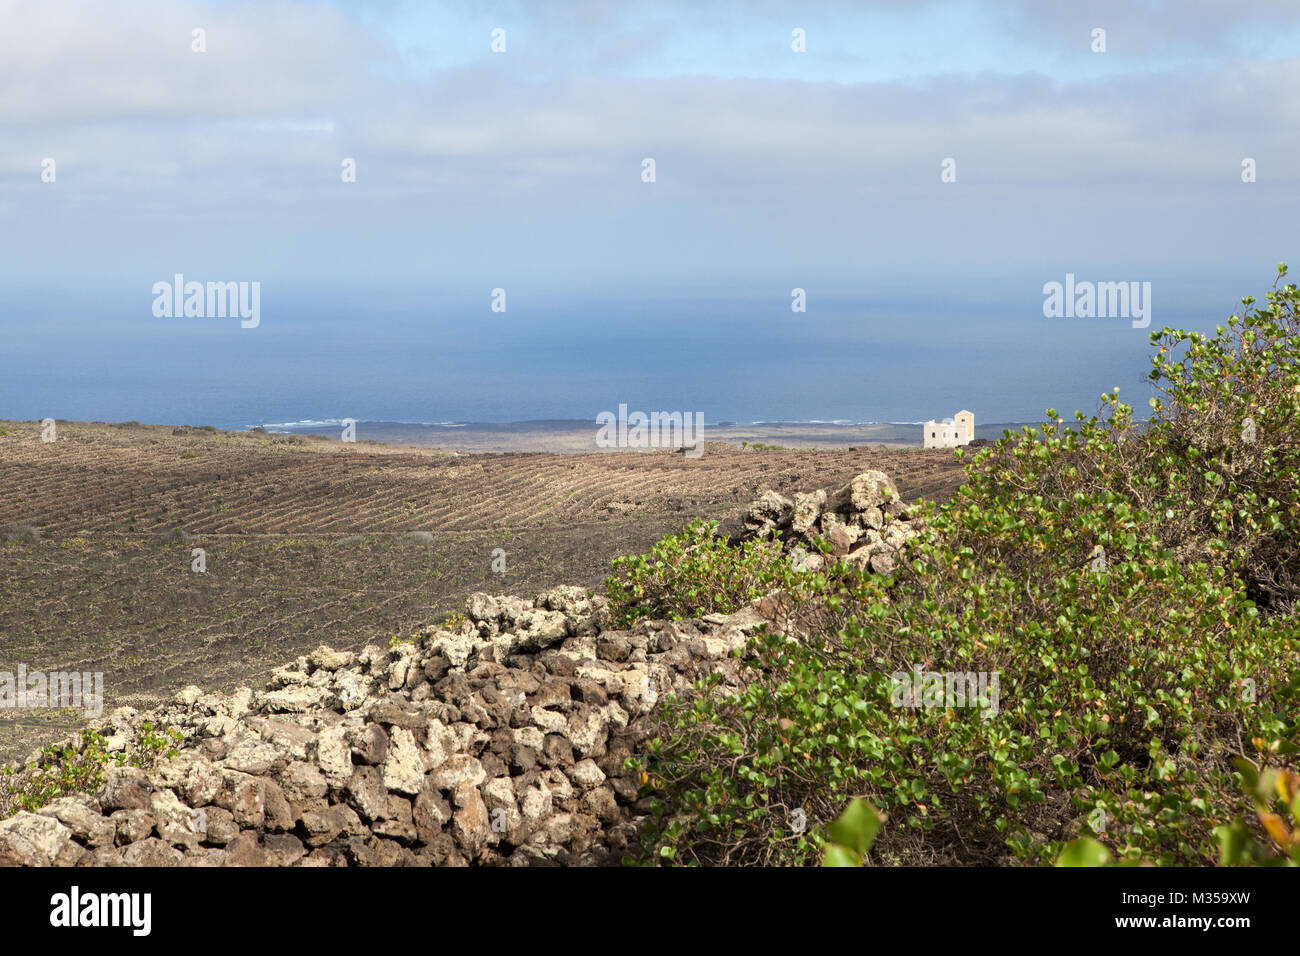 Yé, Haría, Lanzarote, Spain: A view of the countryside from the Volcan of la Corona, old stone wall, vineyards and Atlantic ocean Stock Photo